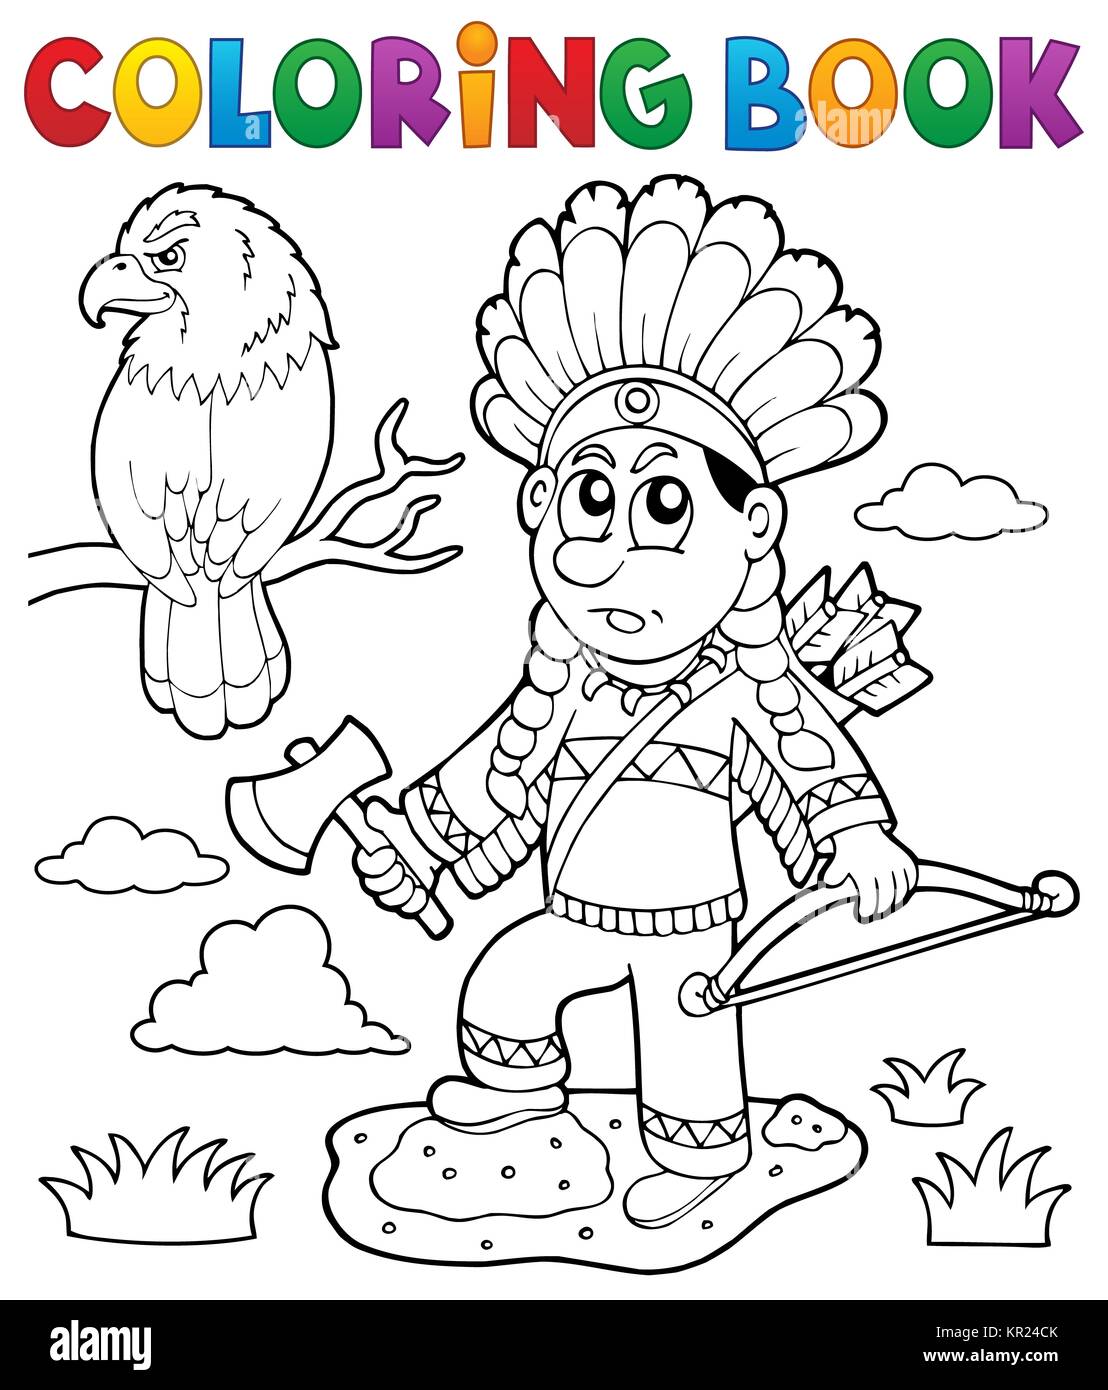 Coloring book Indian theme image 2 Stock Photo